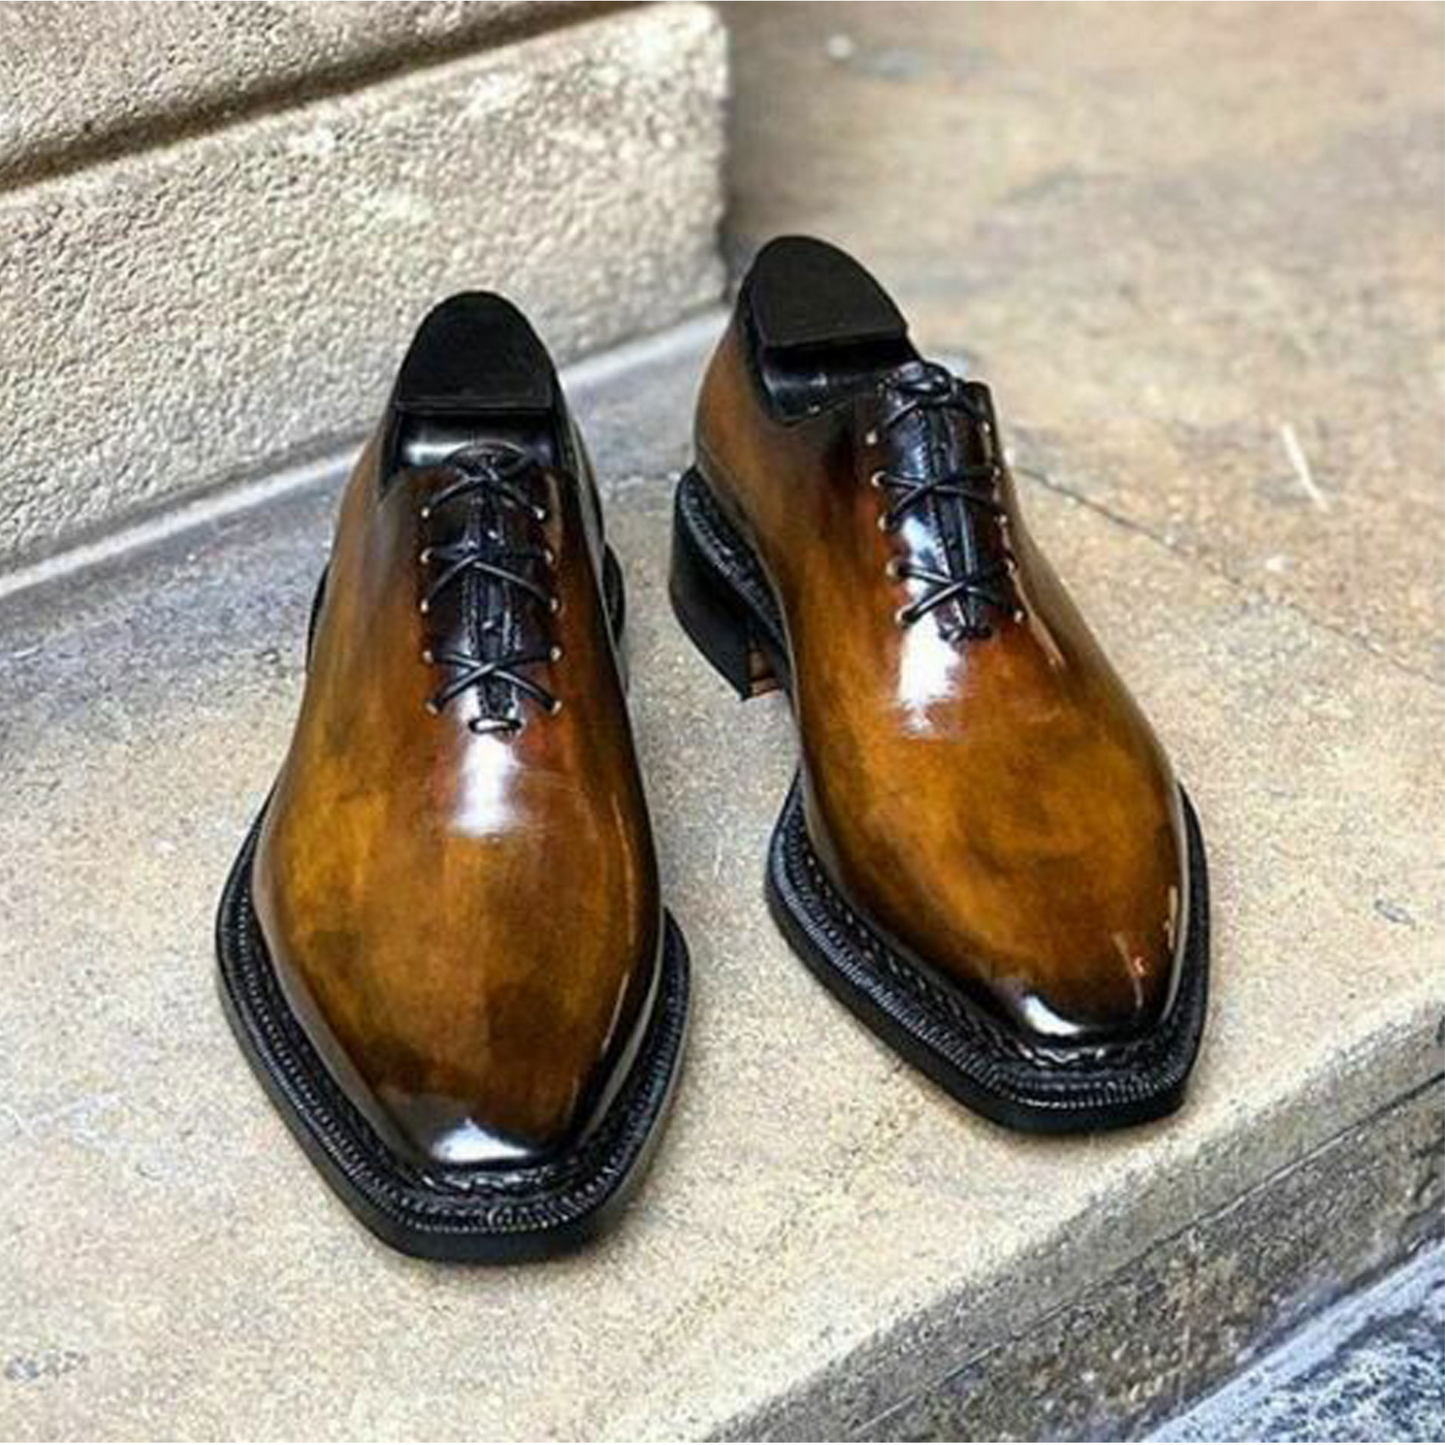 Tailor Made Handmade Bespoke Tan Pure Calf Leather Whole cut Oxford Shoes